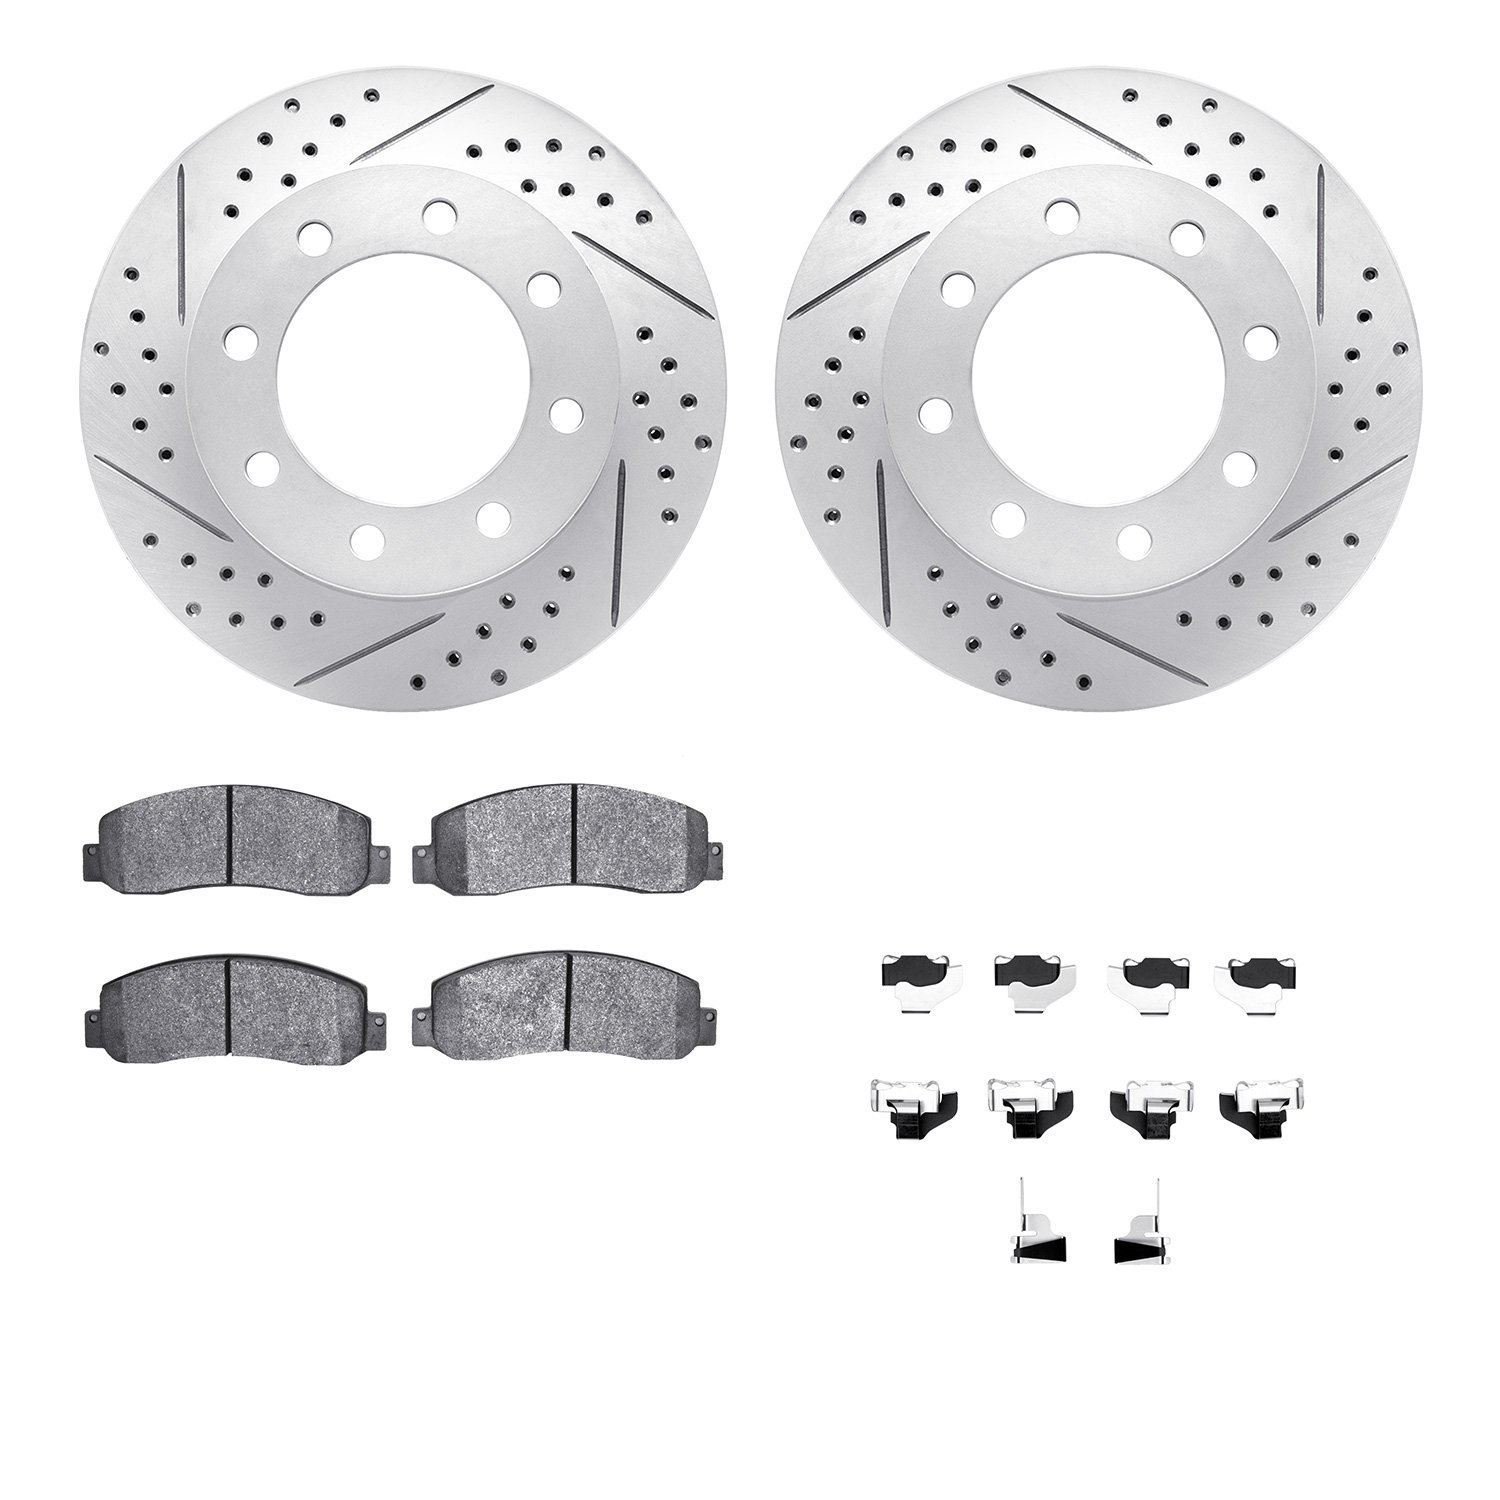 2212-99152 Geoperformance Drilled/Slotted Rotors w/Heavy-Duty Pads Kit & Hardware, 2005-2011 Ford/Lincoln/Mercury/Mazda, Positio